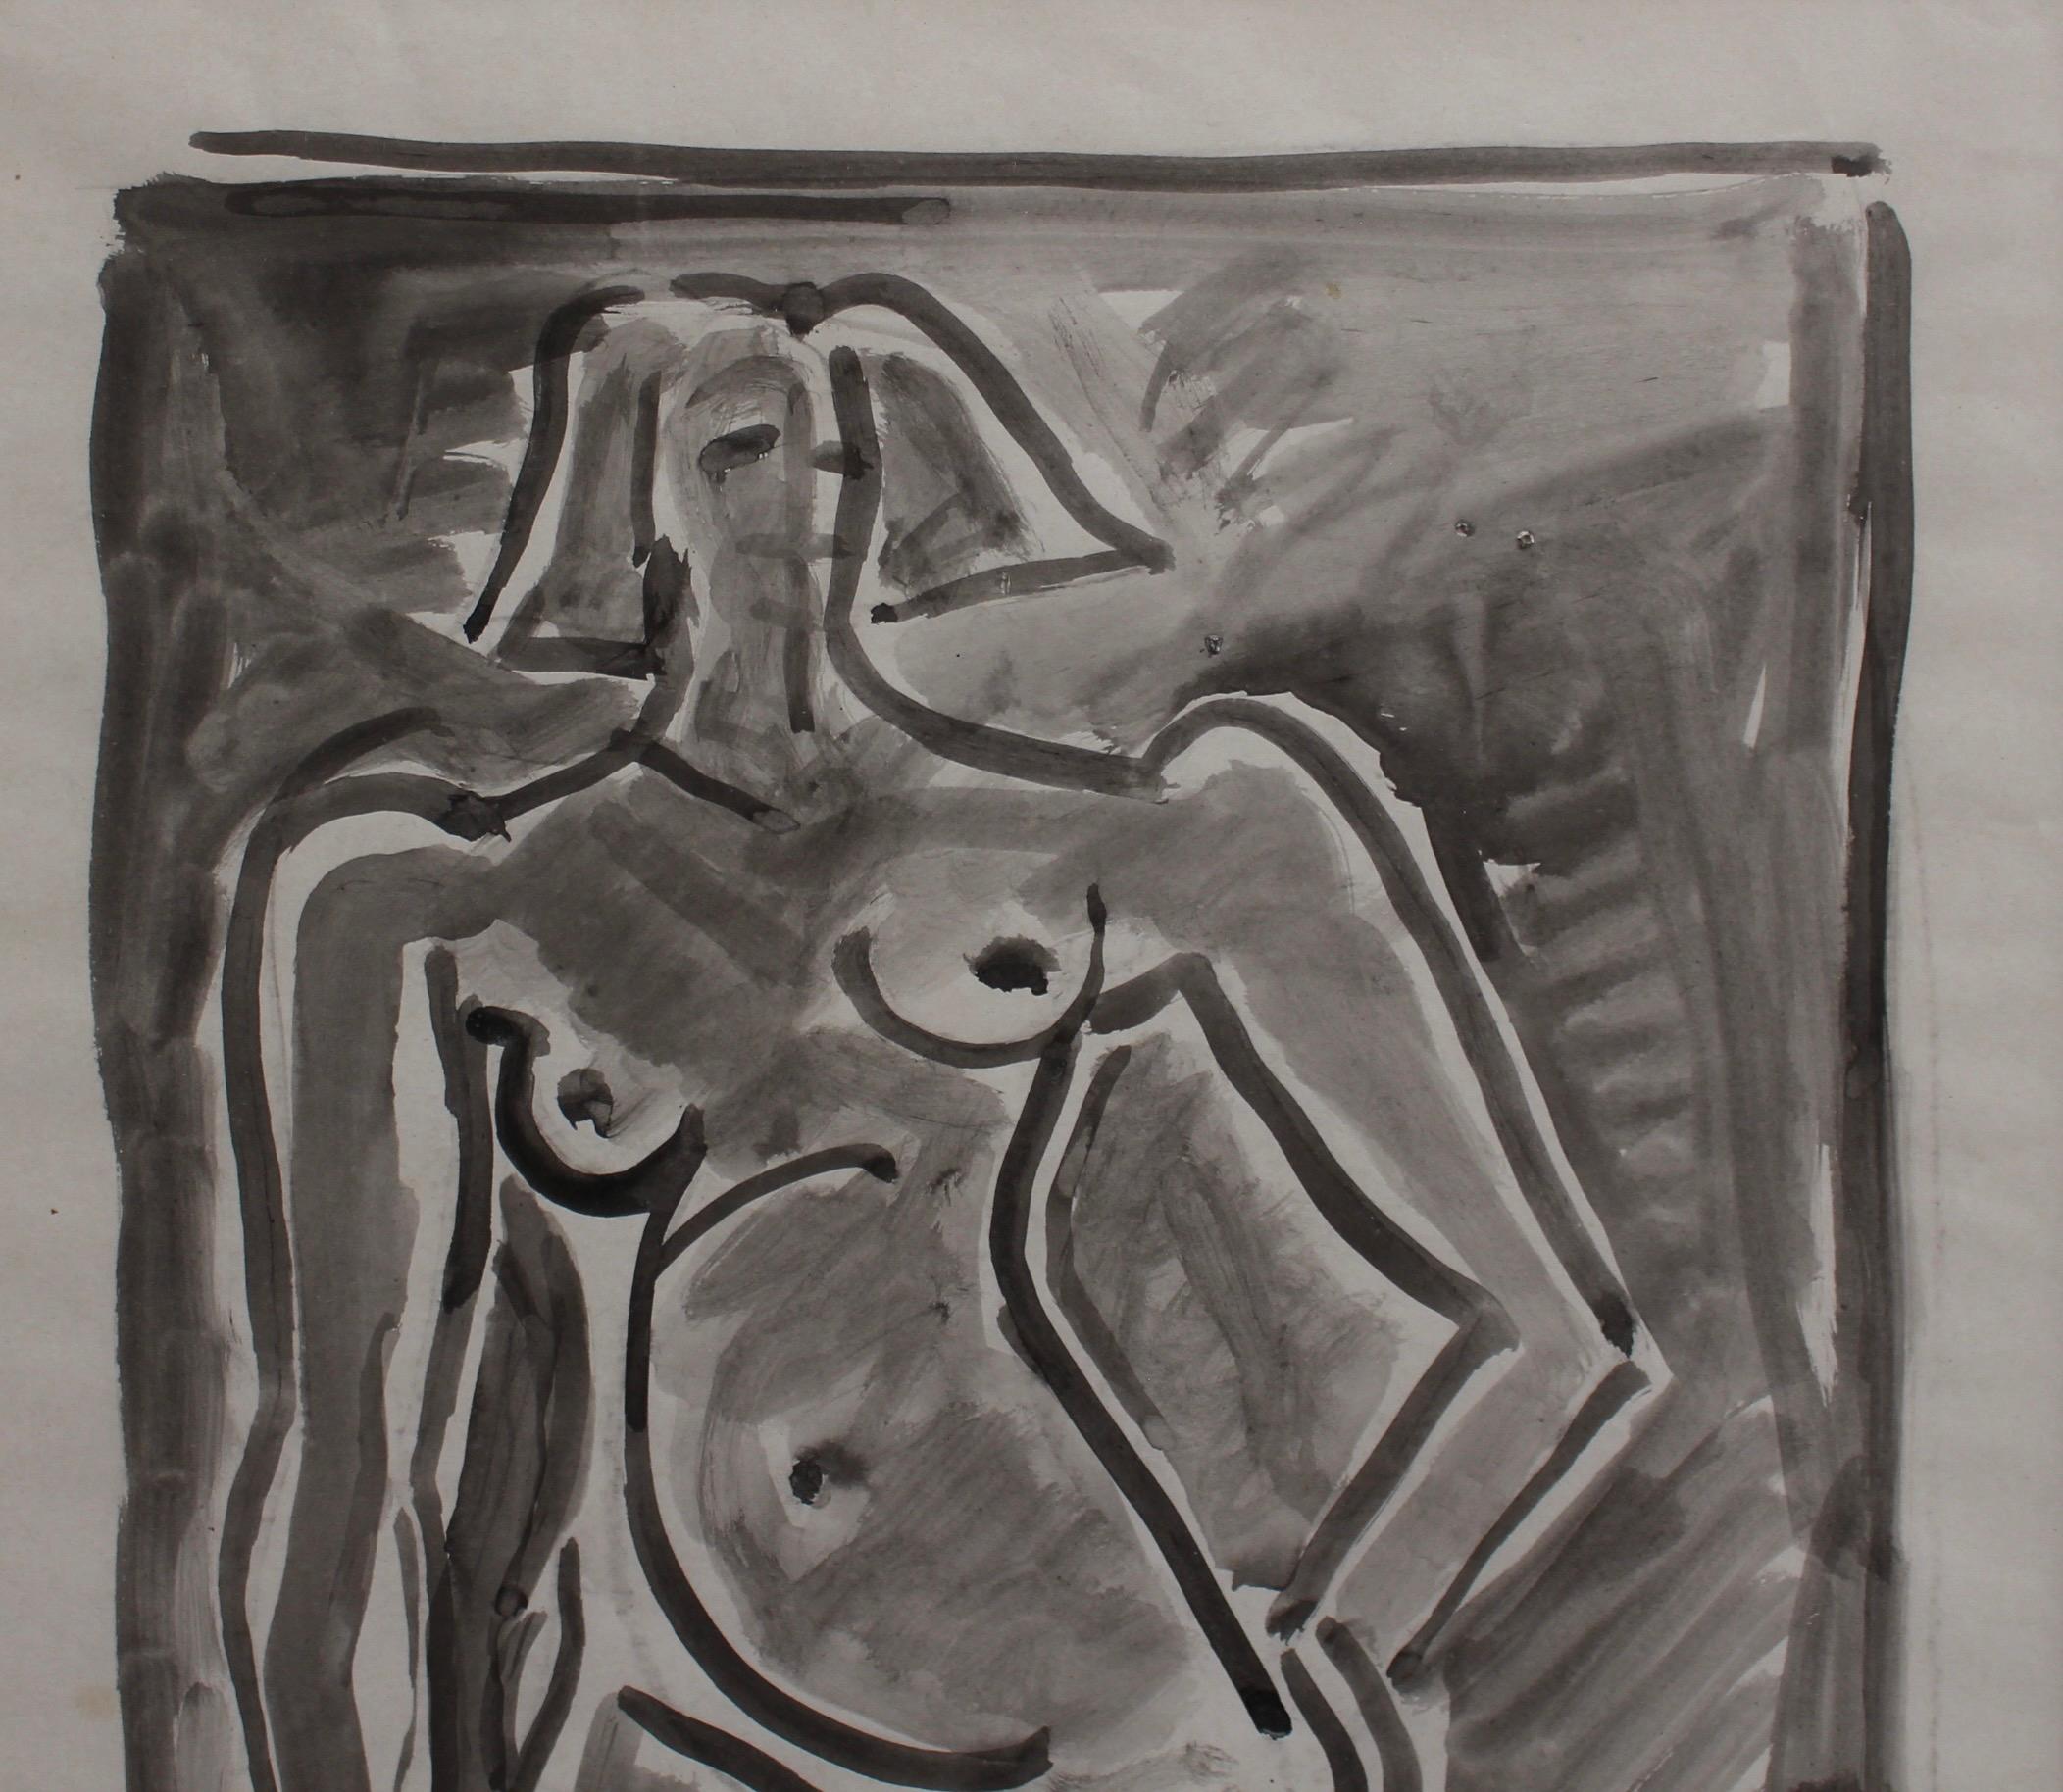 'Standing Nude', watercolour on paper, by Louis Latapie (circa 1940s). The painting was most likely completed as the artist was transitioning between his figurative phase to cubism and abstraction. In many ways it bears resemblance to a